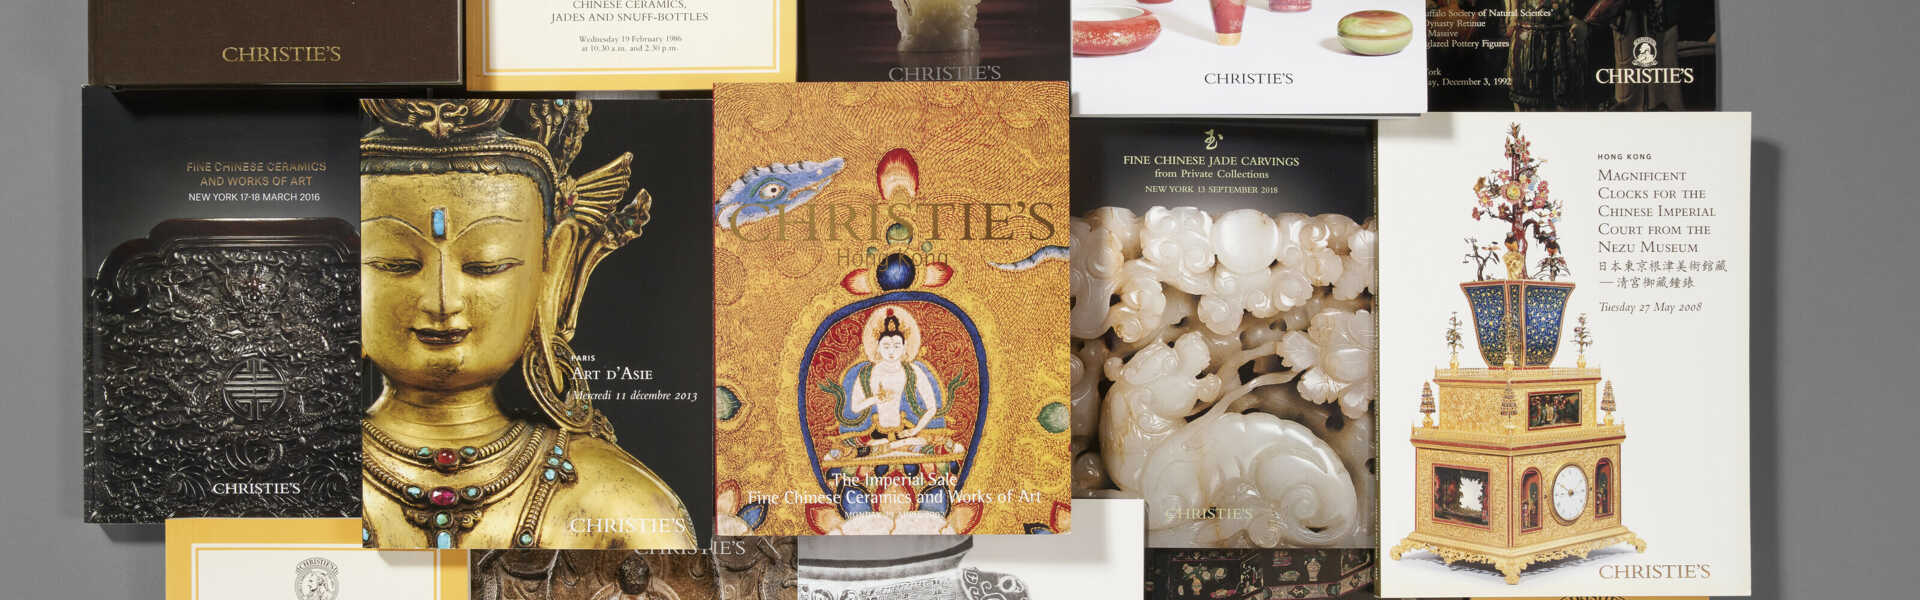 CHRISTIE'S AUCTION CATALOGUES OF CHINESE AND ASIAN ART - A group of approximately 790 Christie's auction catalogues of Chinese and Asian art, spanning from 1974.